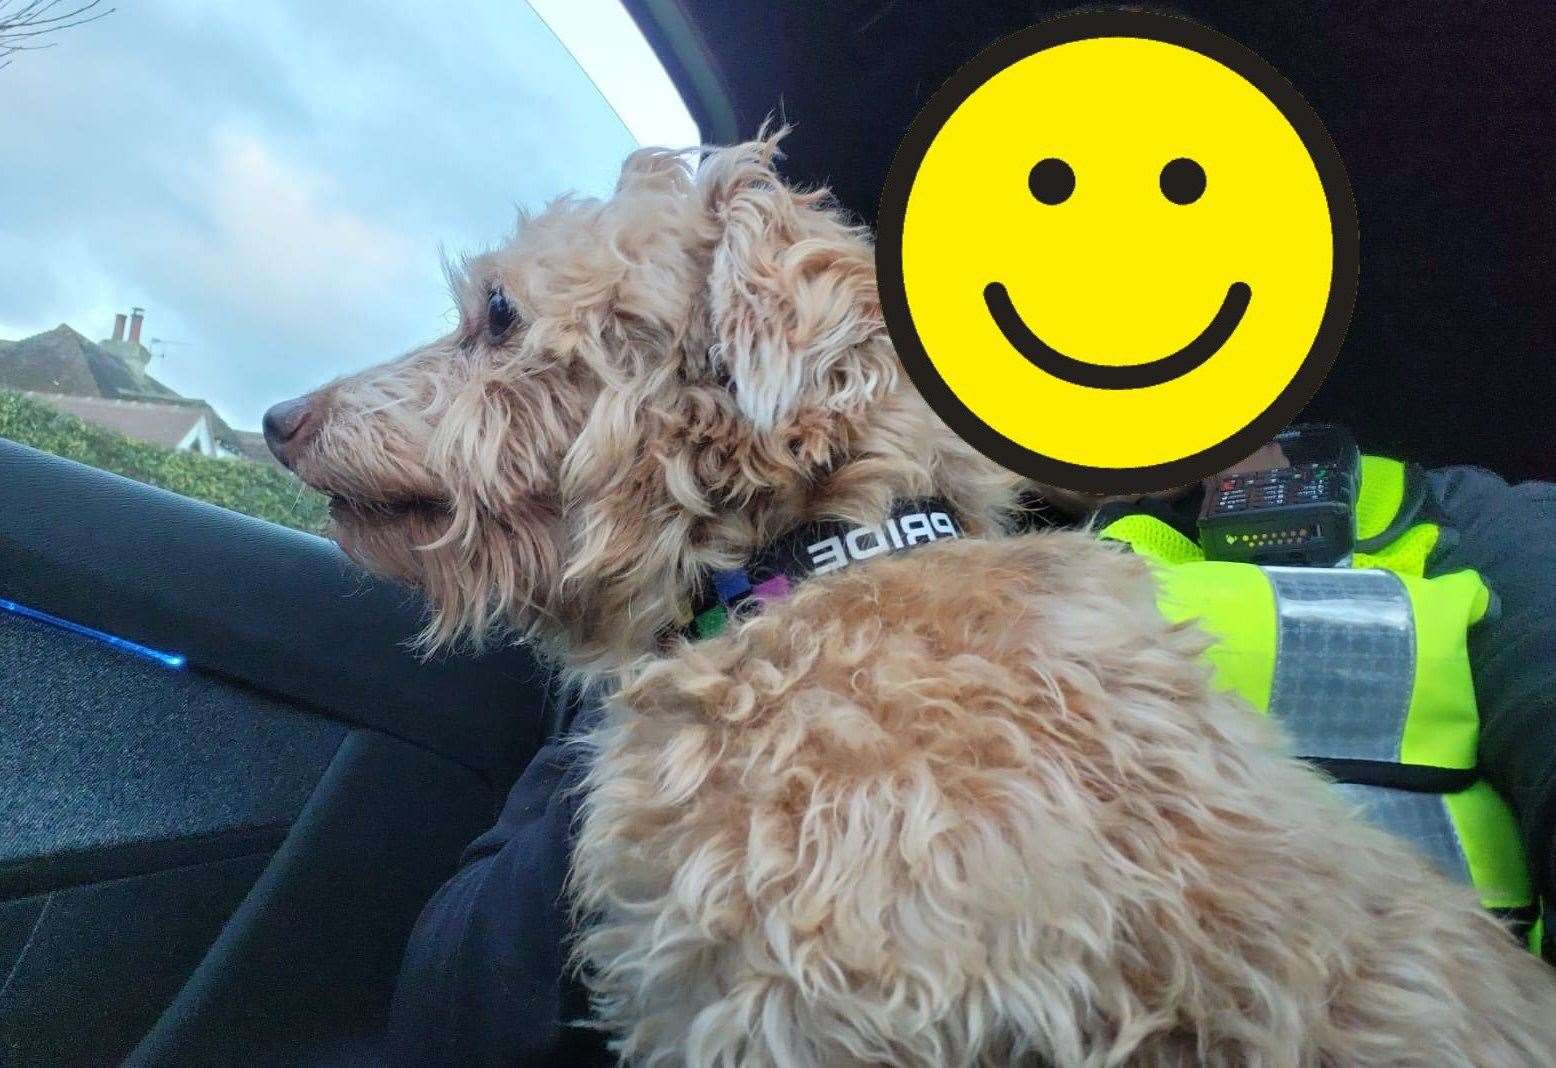 The dog was taken to a vet before being reunited with its owner. Picture: BTP Kent